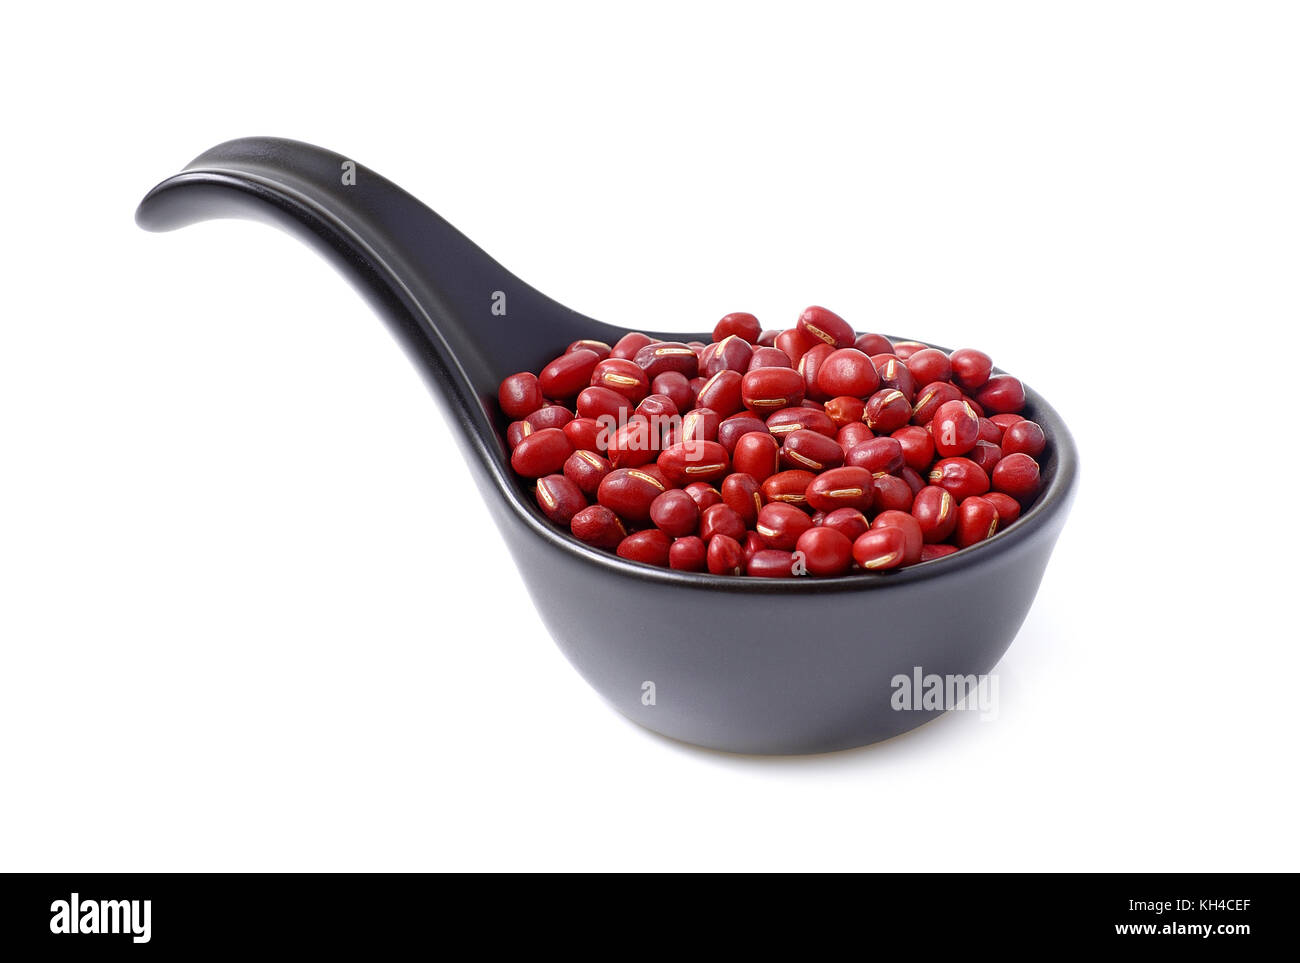 Red beans in a cup on a white background.health natural more red beans in cup Stock Photo